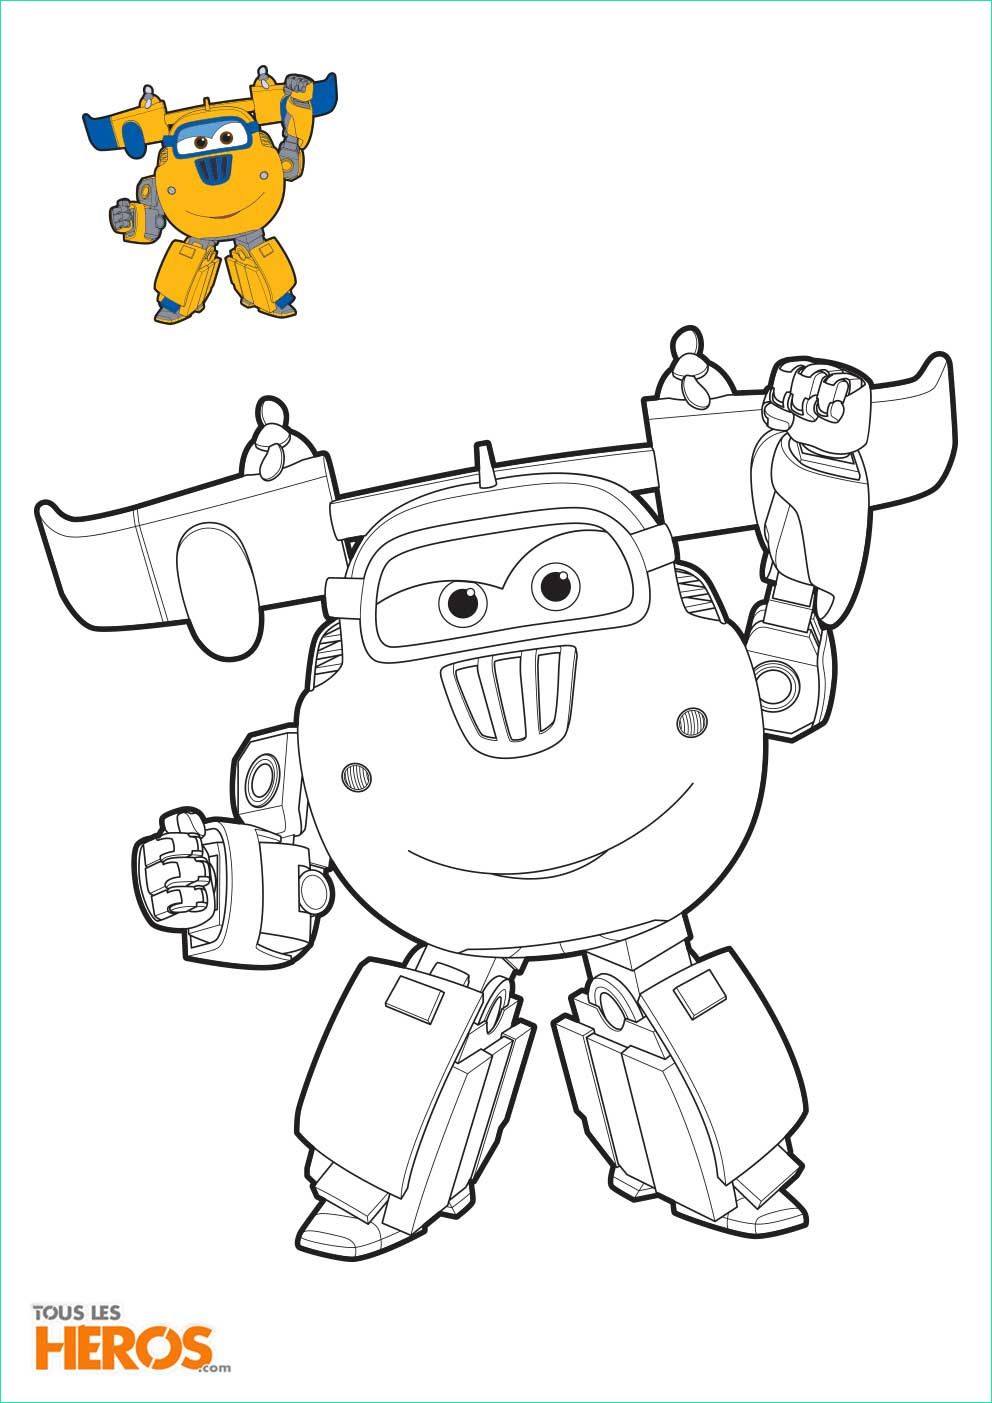 Coloriage Super Wings Impressionnant Photos Dessin Super Wings Bestof S Coloriages Super Wings